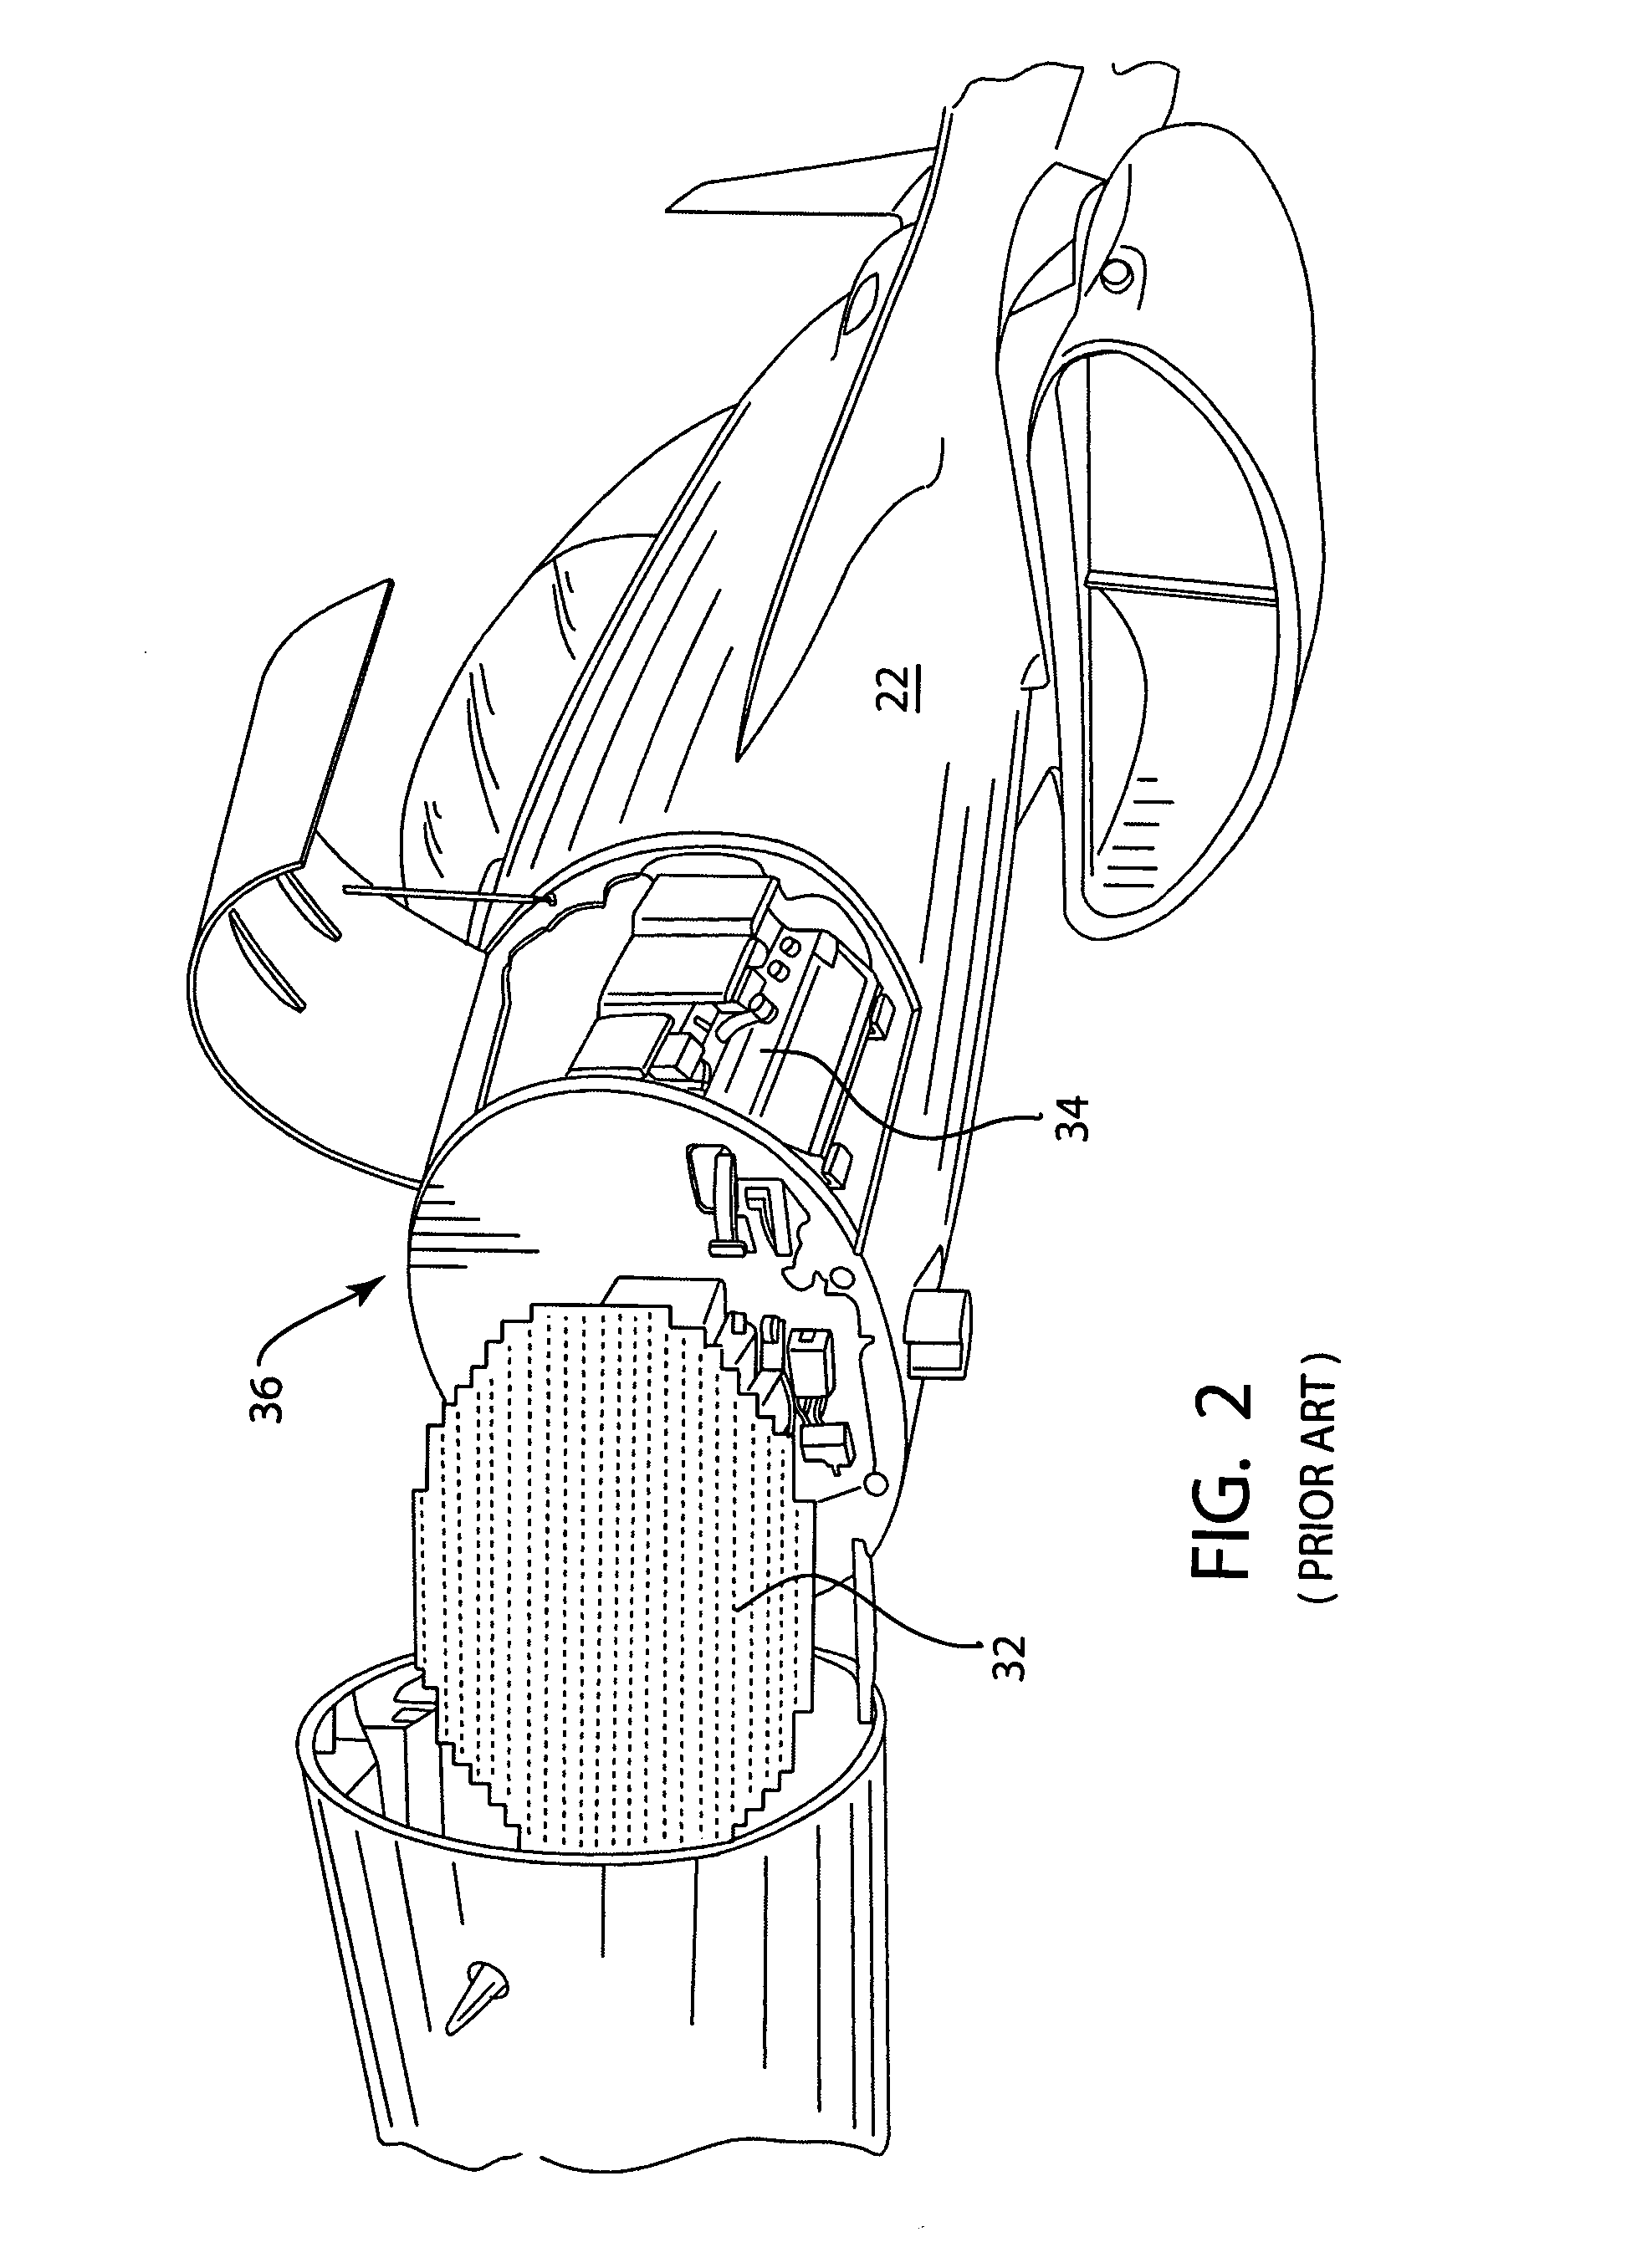 Method for reconditioning or processing a FCR APG-68 tactical radar unit